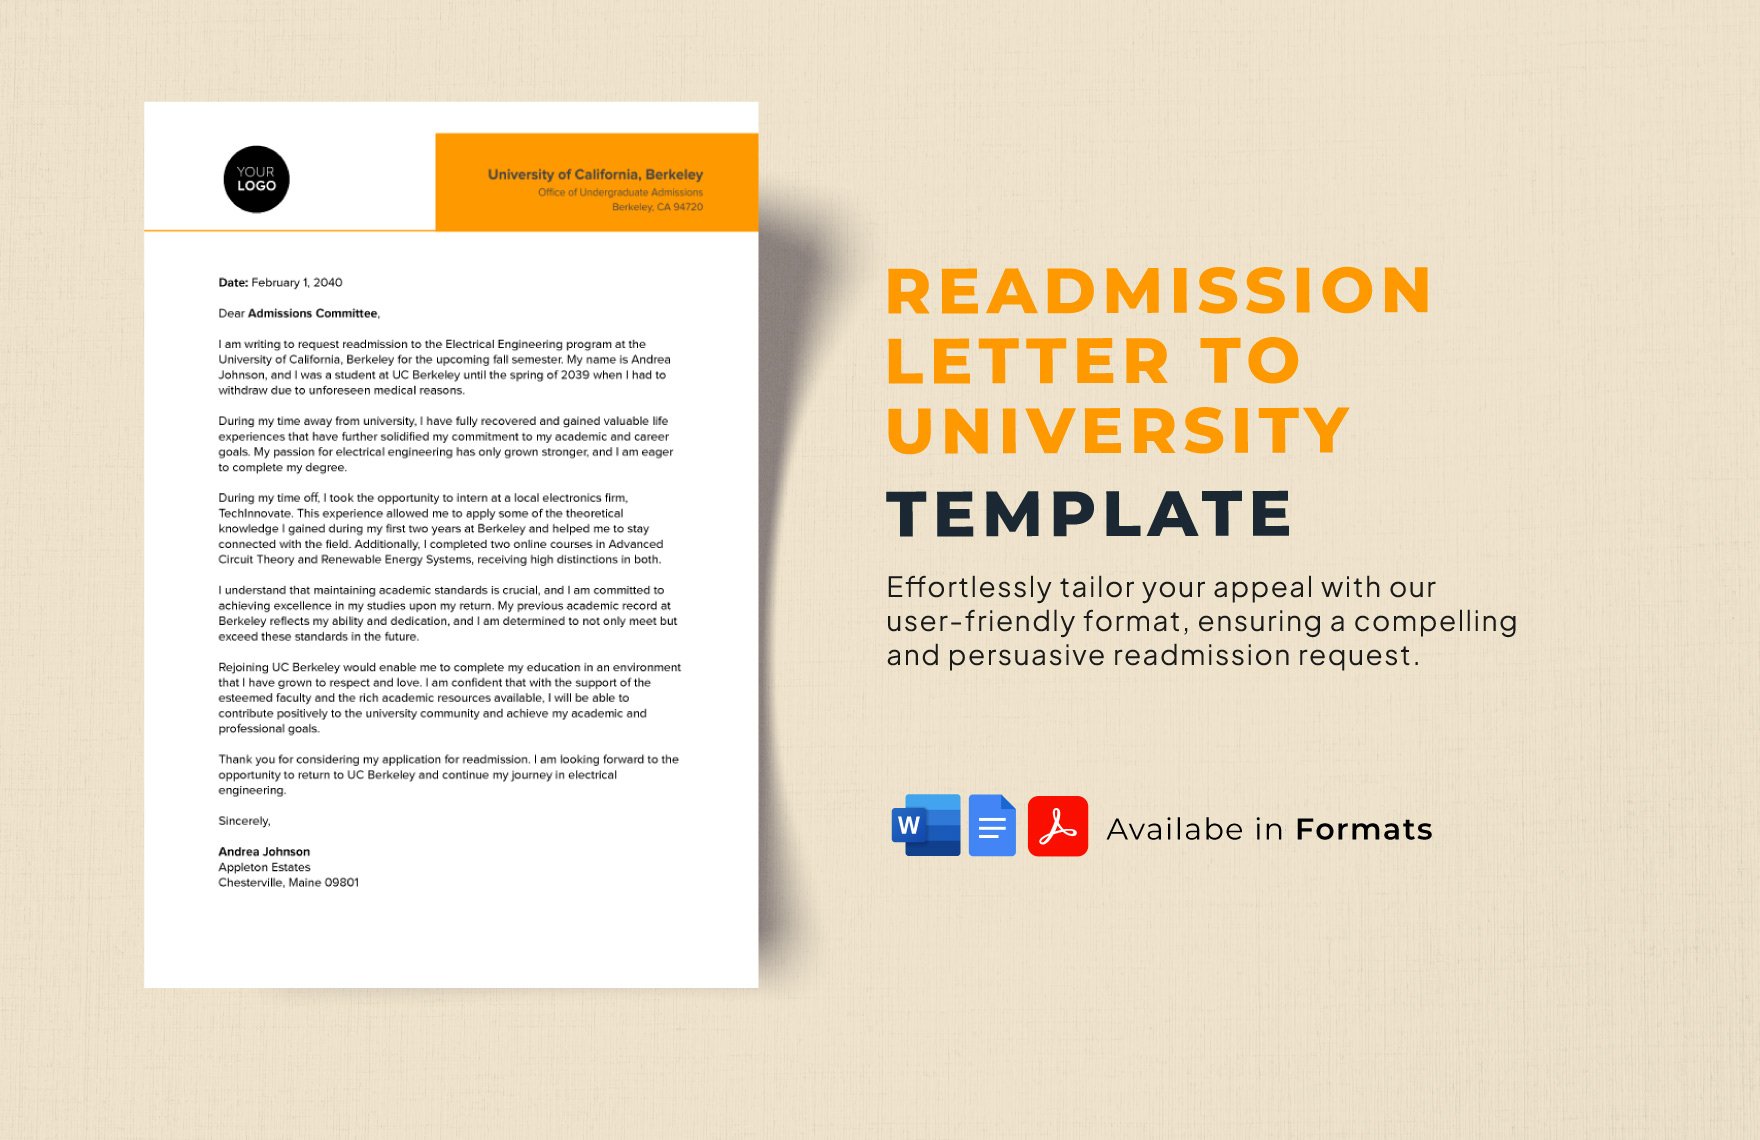 Readmission Letter to University Template